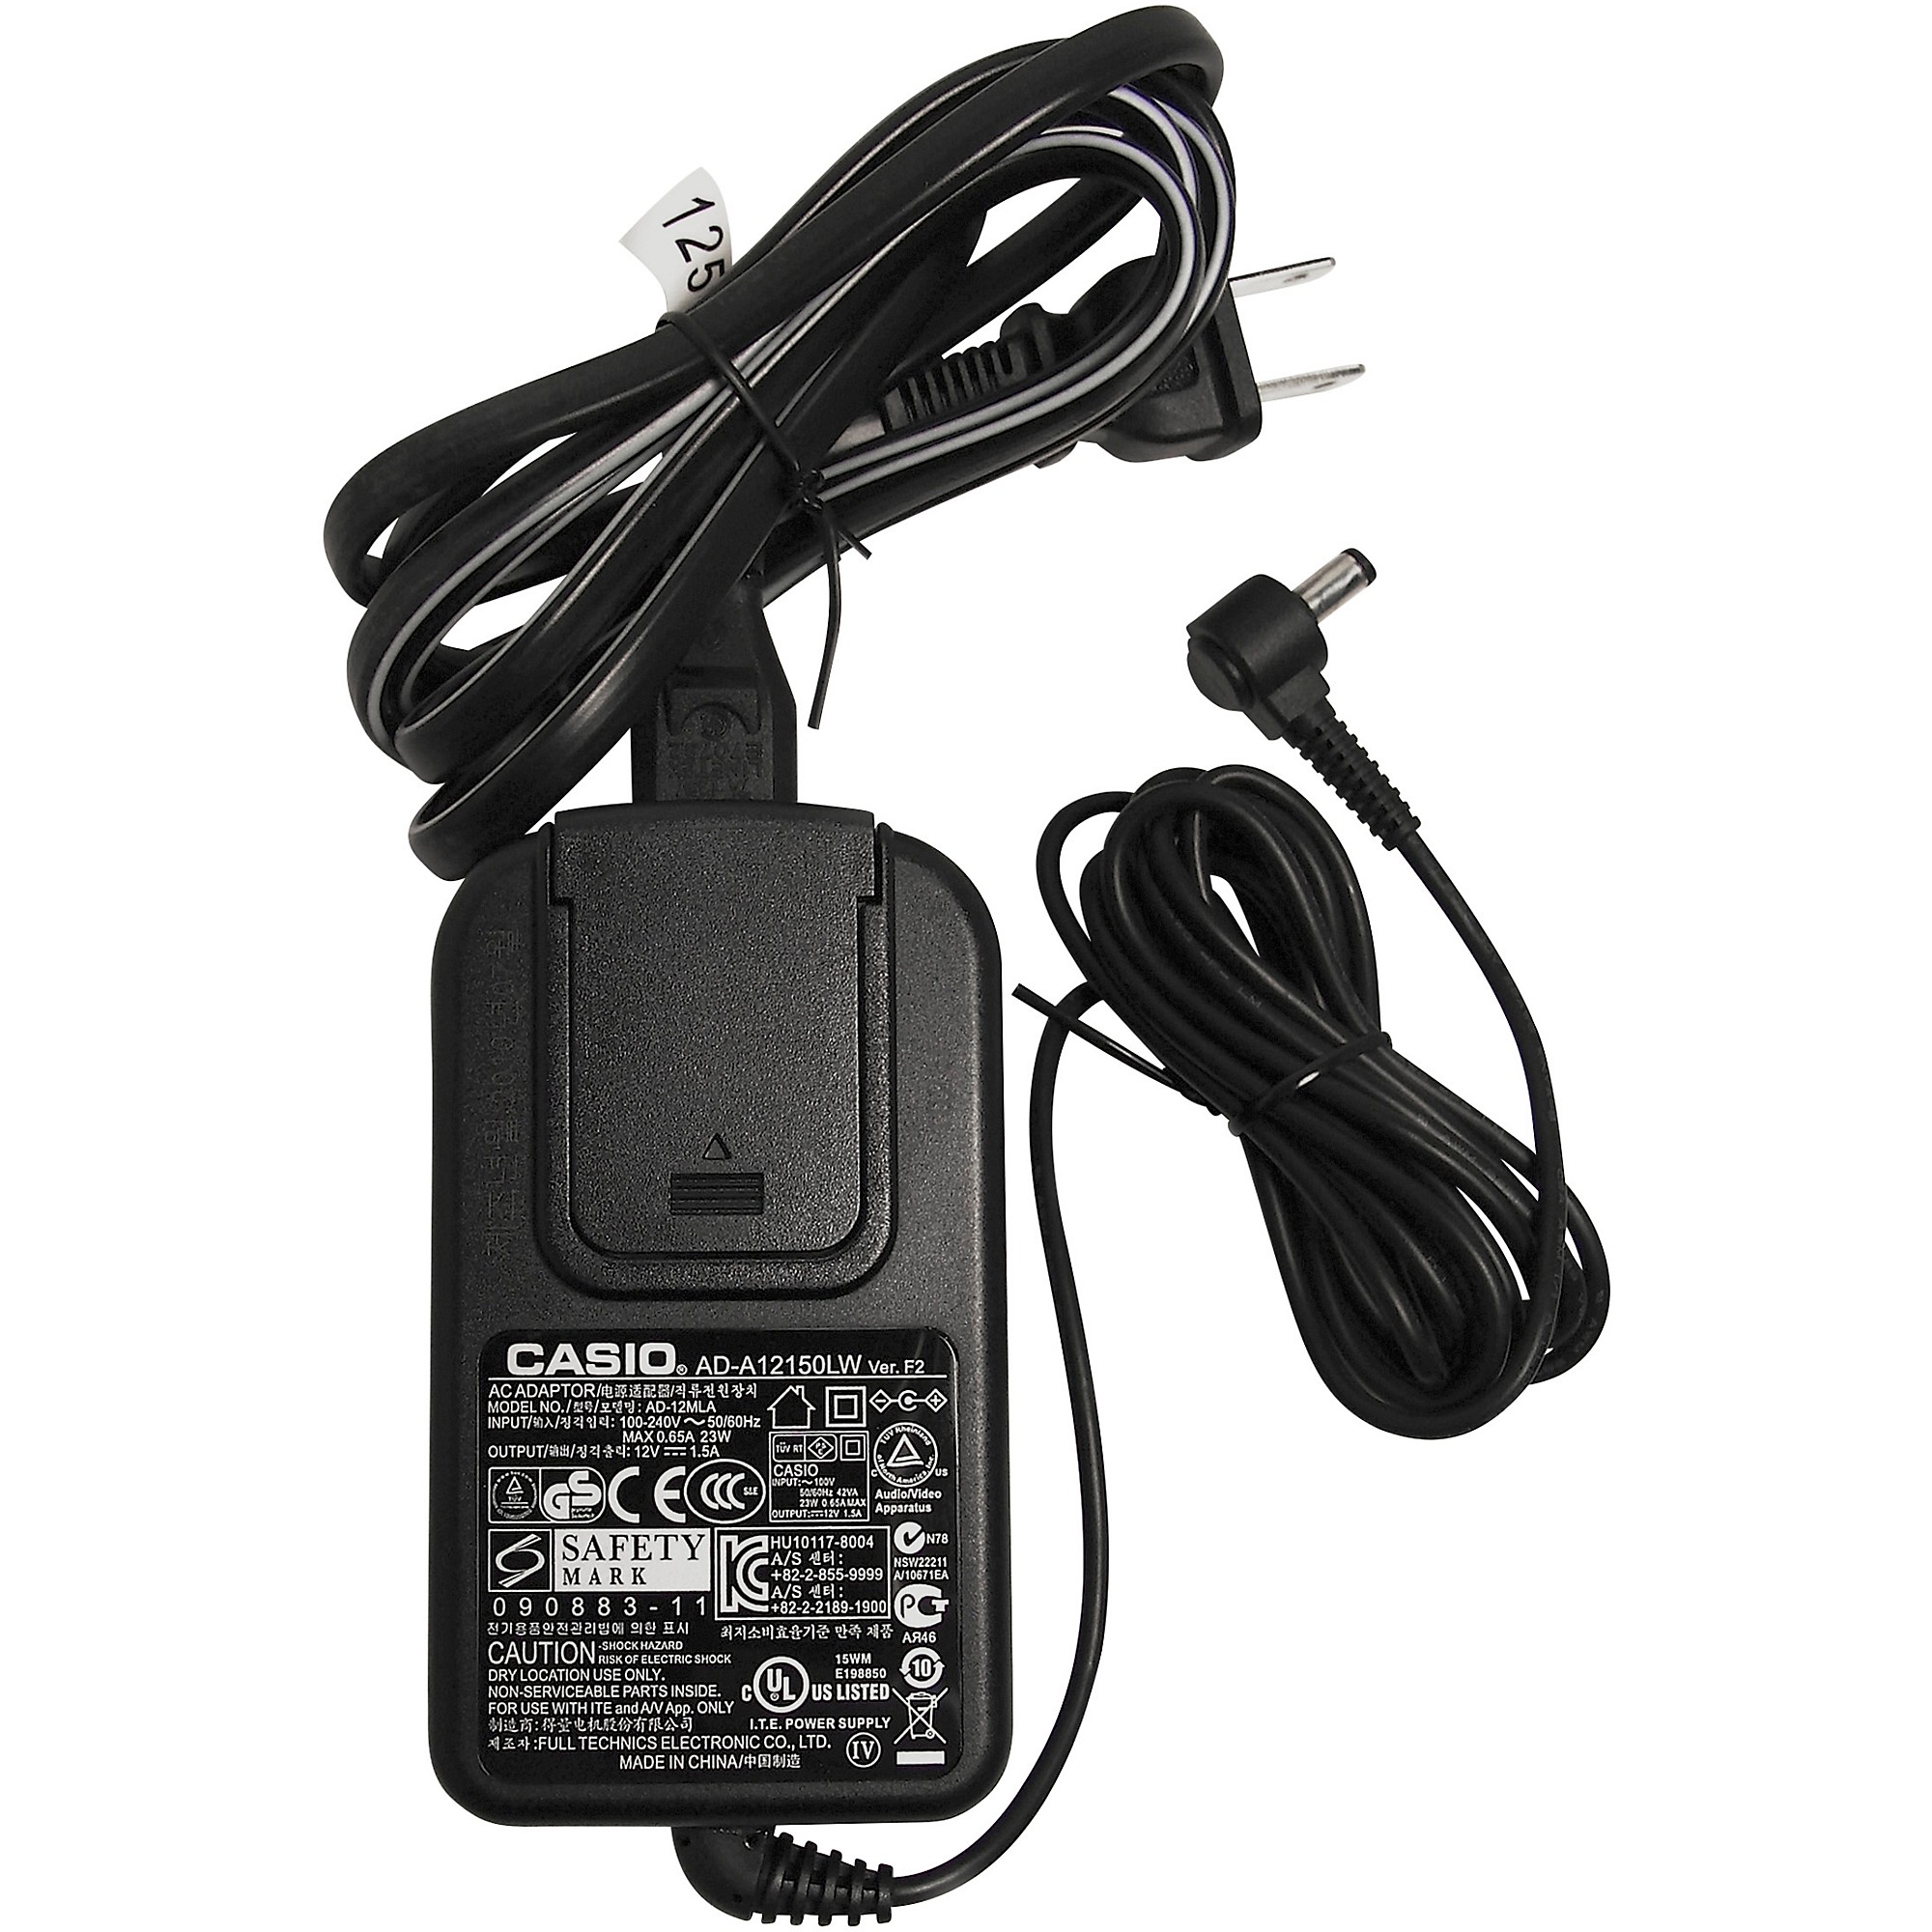 Replacement AD-A12150 Ac Power Adapter for Casio Privia series Keyboard Power Supply Cord 